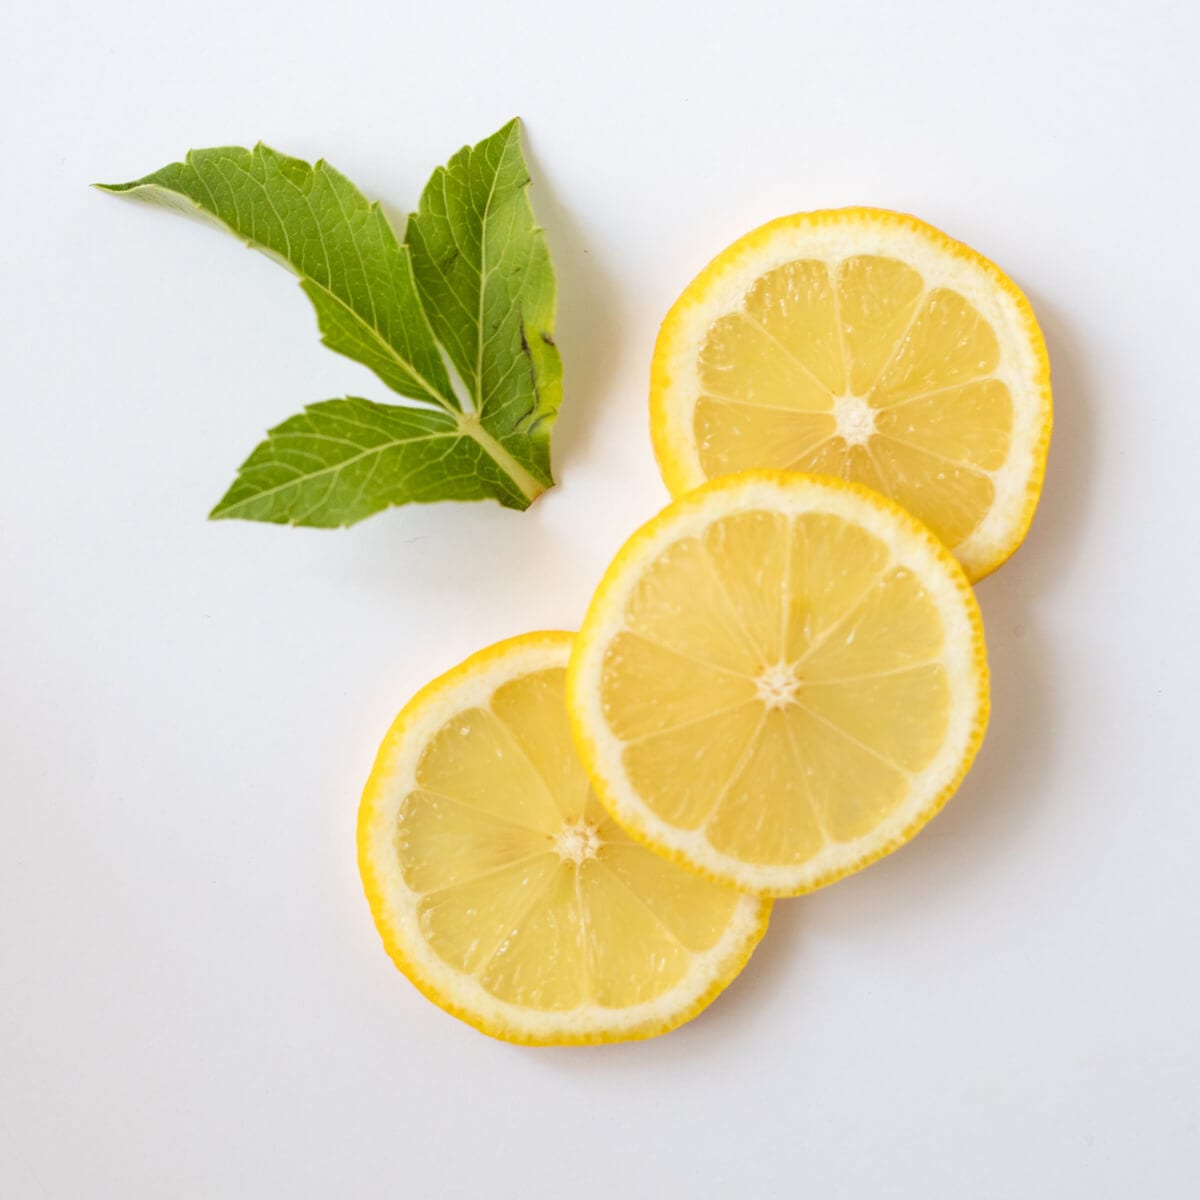 Citric Acid is an alpha/beta hydroxy acid found naturally in citrus fruits such as lemons and limes helps to brighten skin